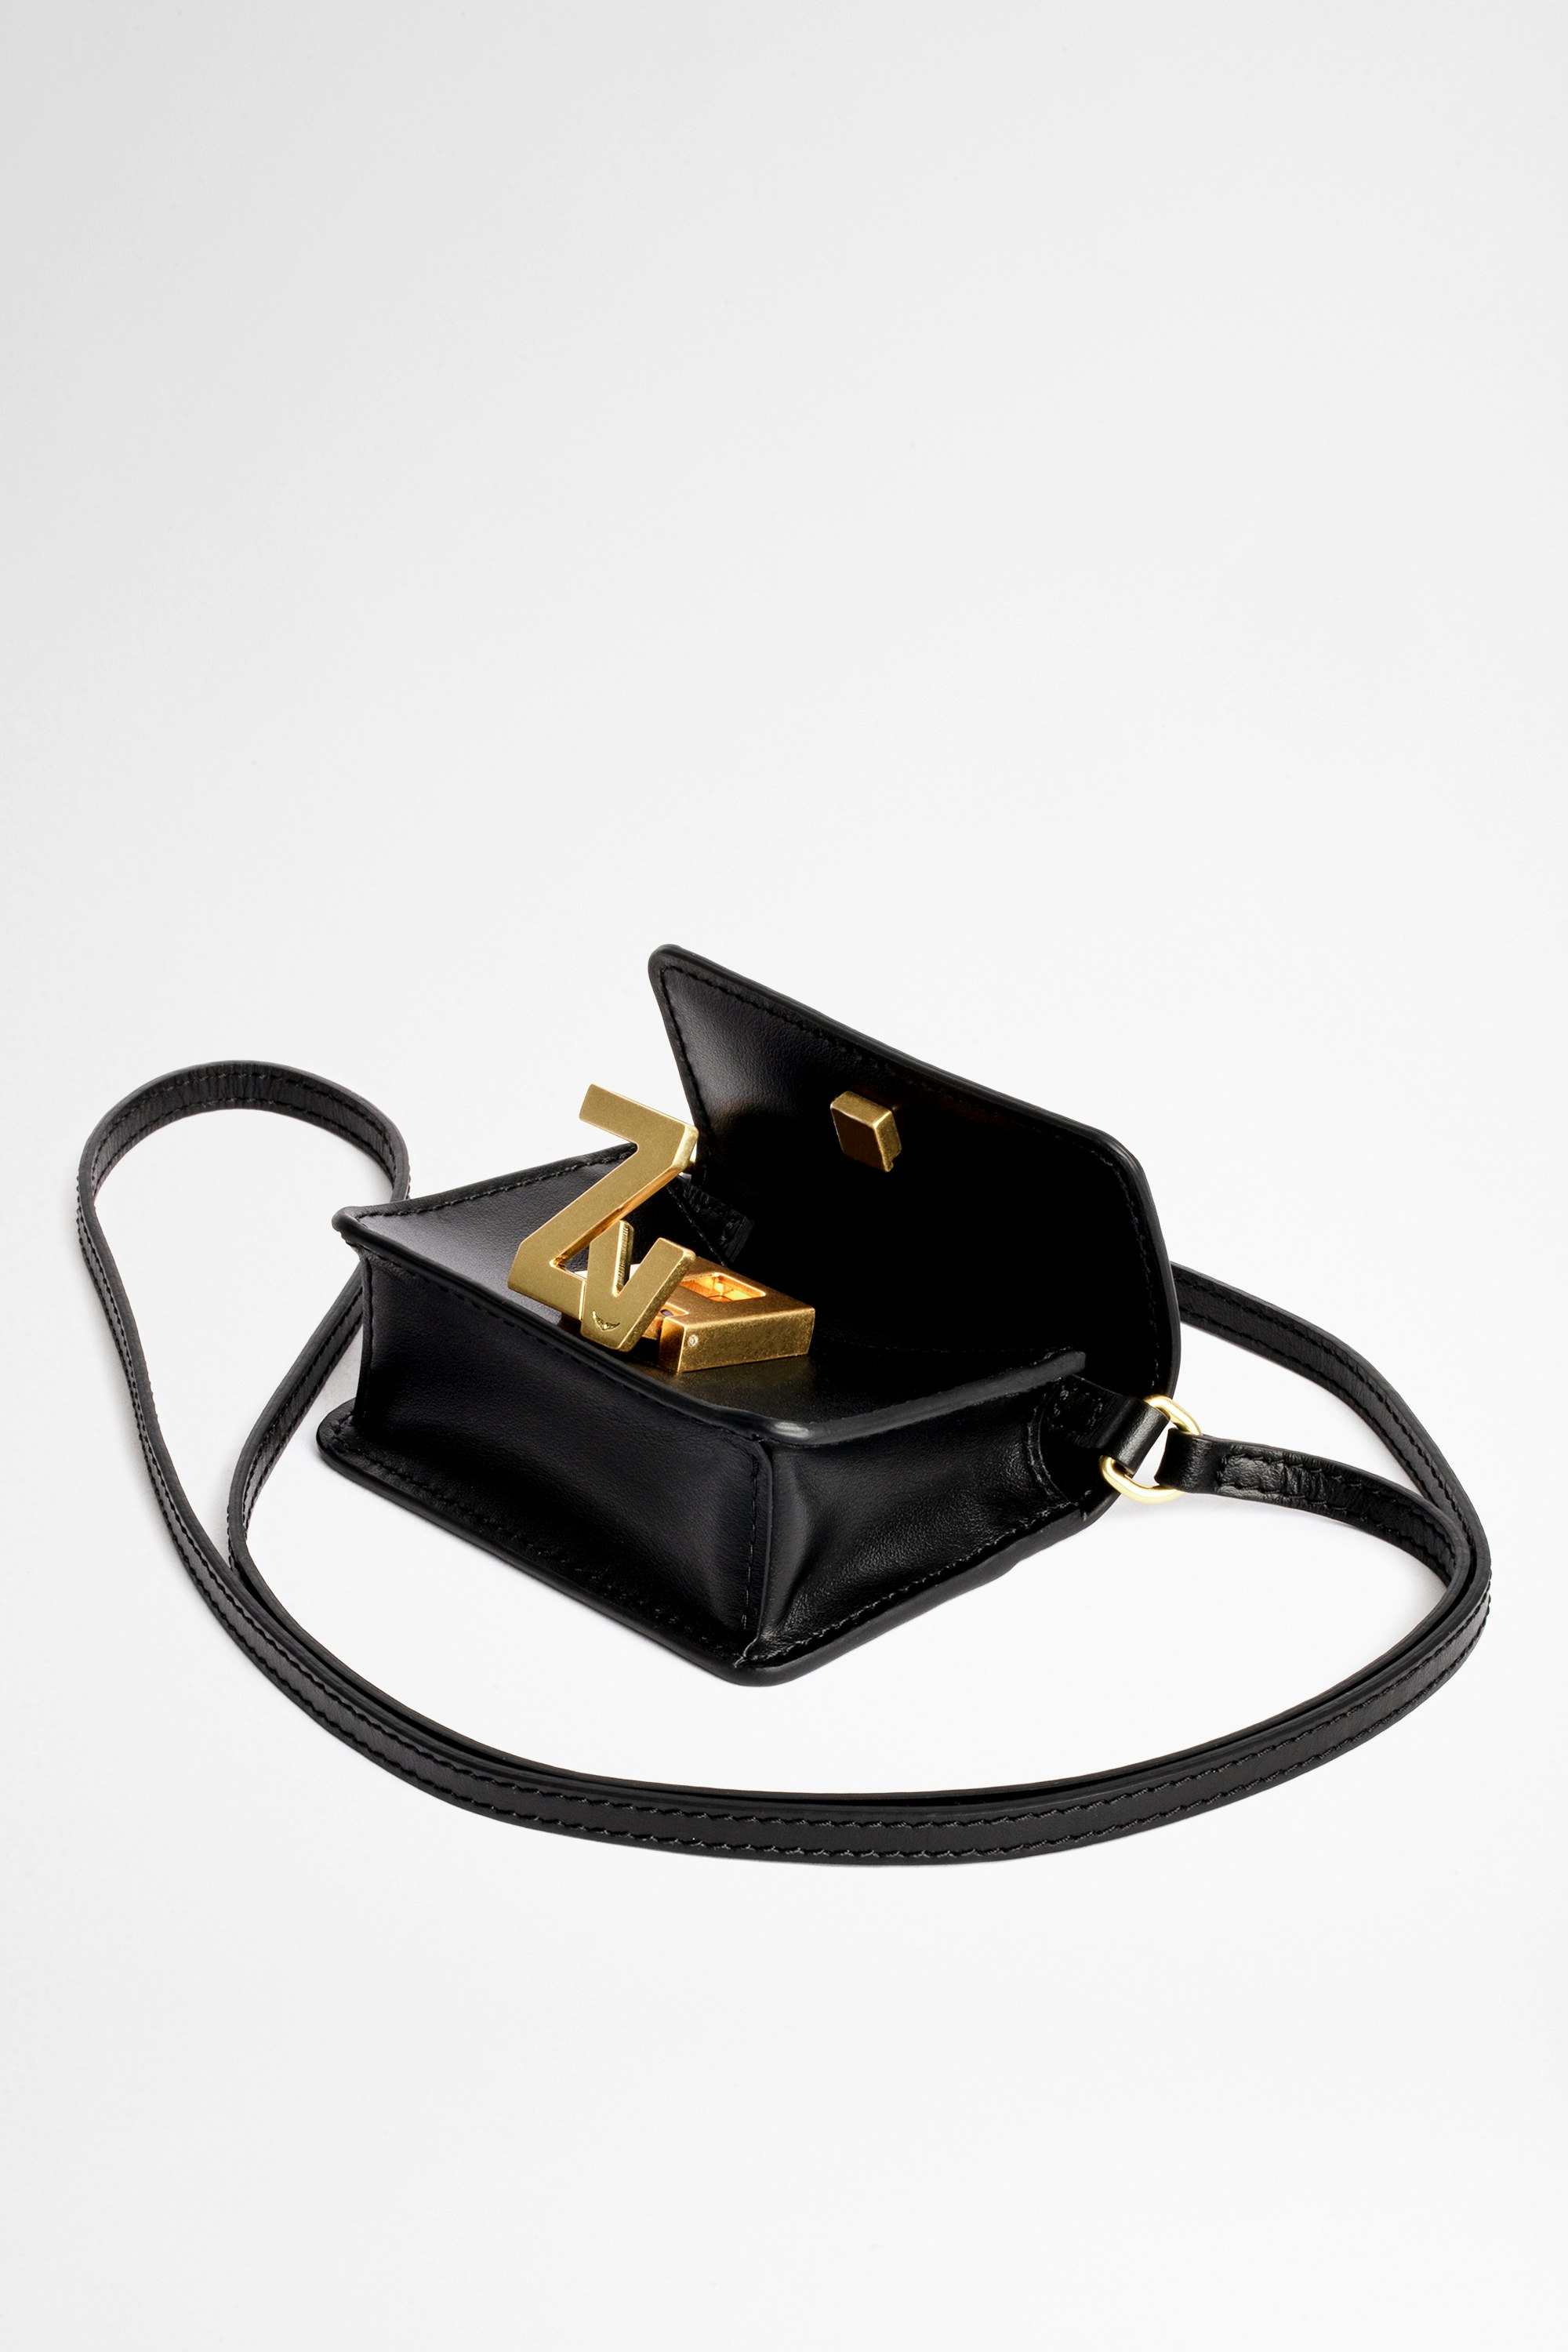 ZV Initiale City Grigri Wallet-Style Clutch